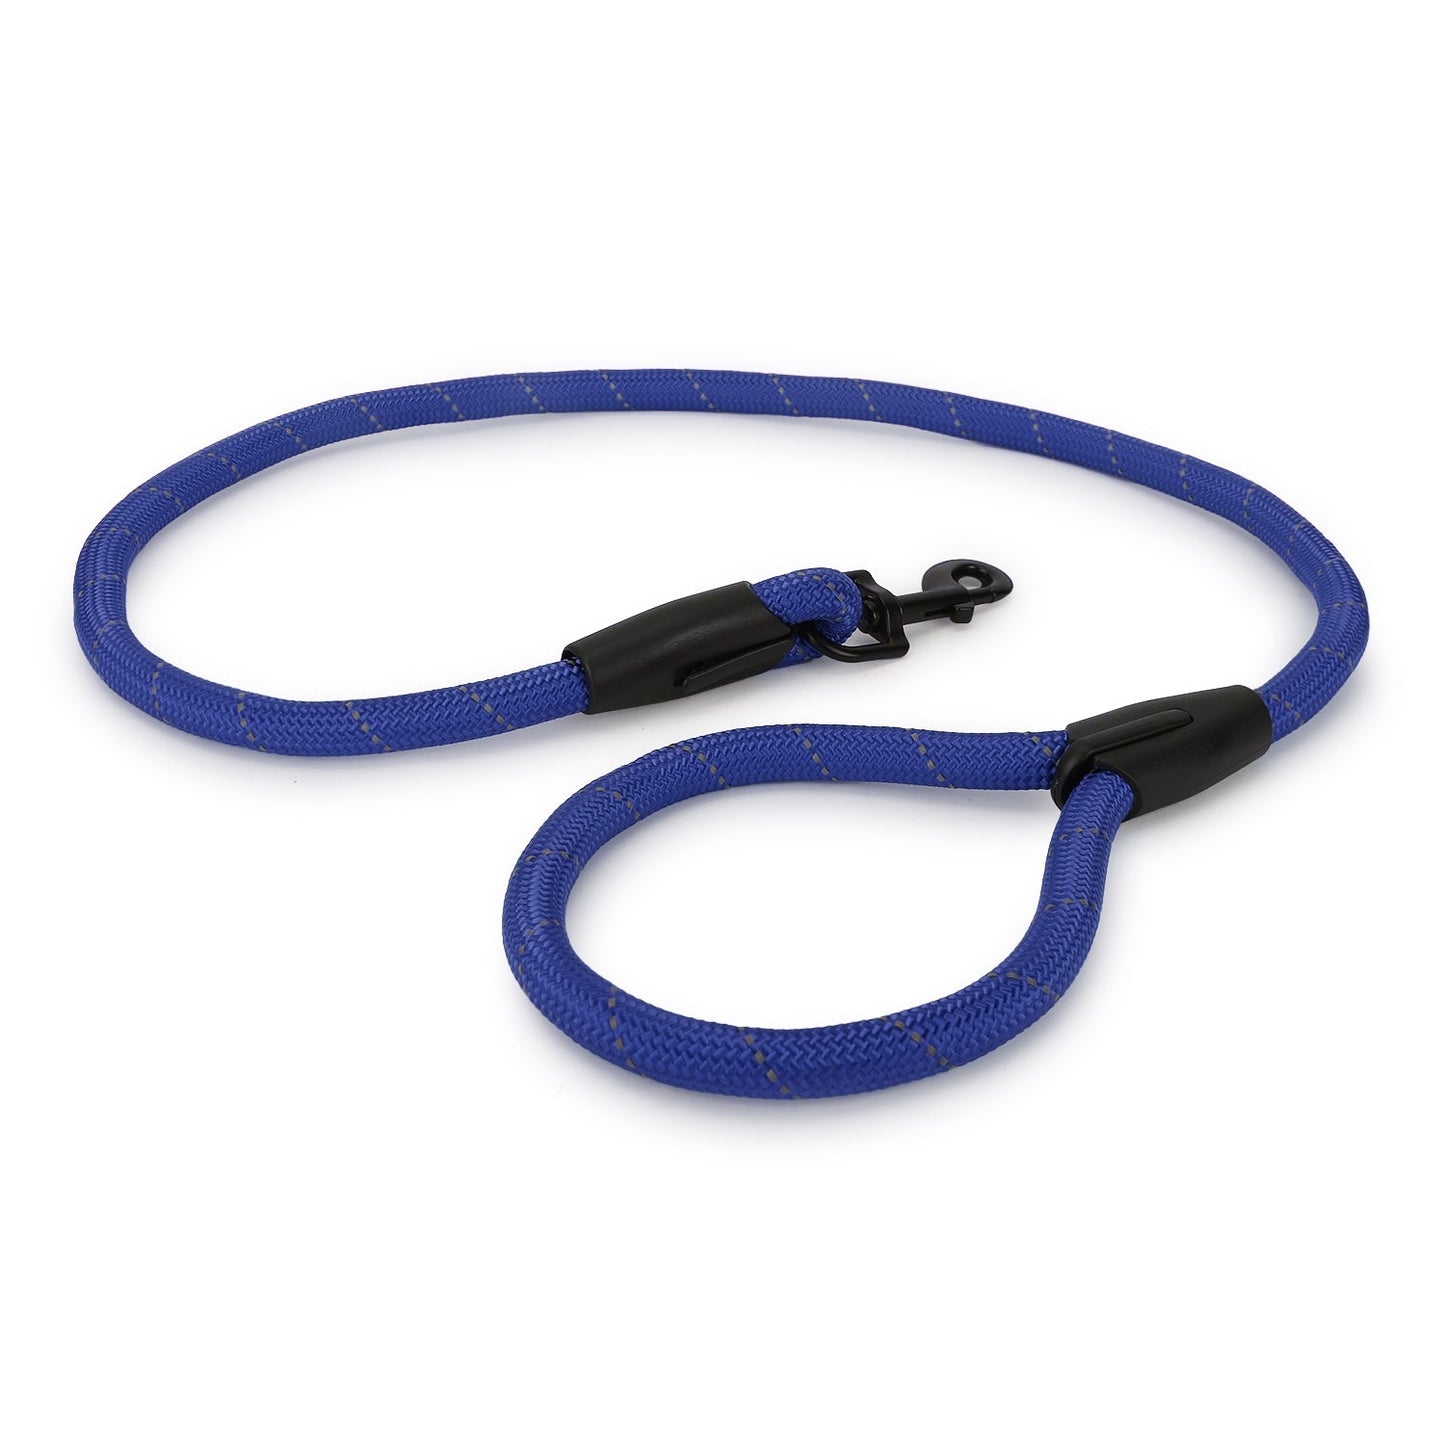 Basil Rope Leash for Dogs, 4 Feet (Solid Blue)